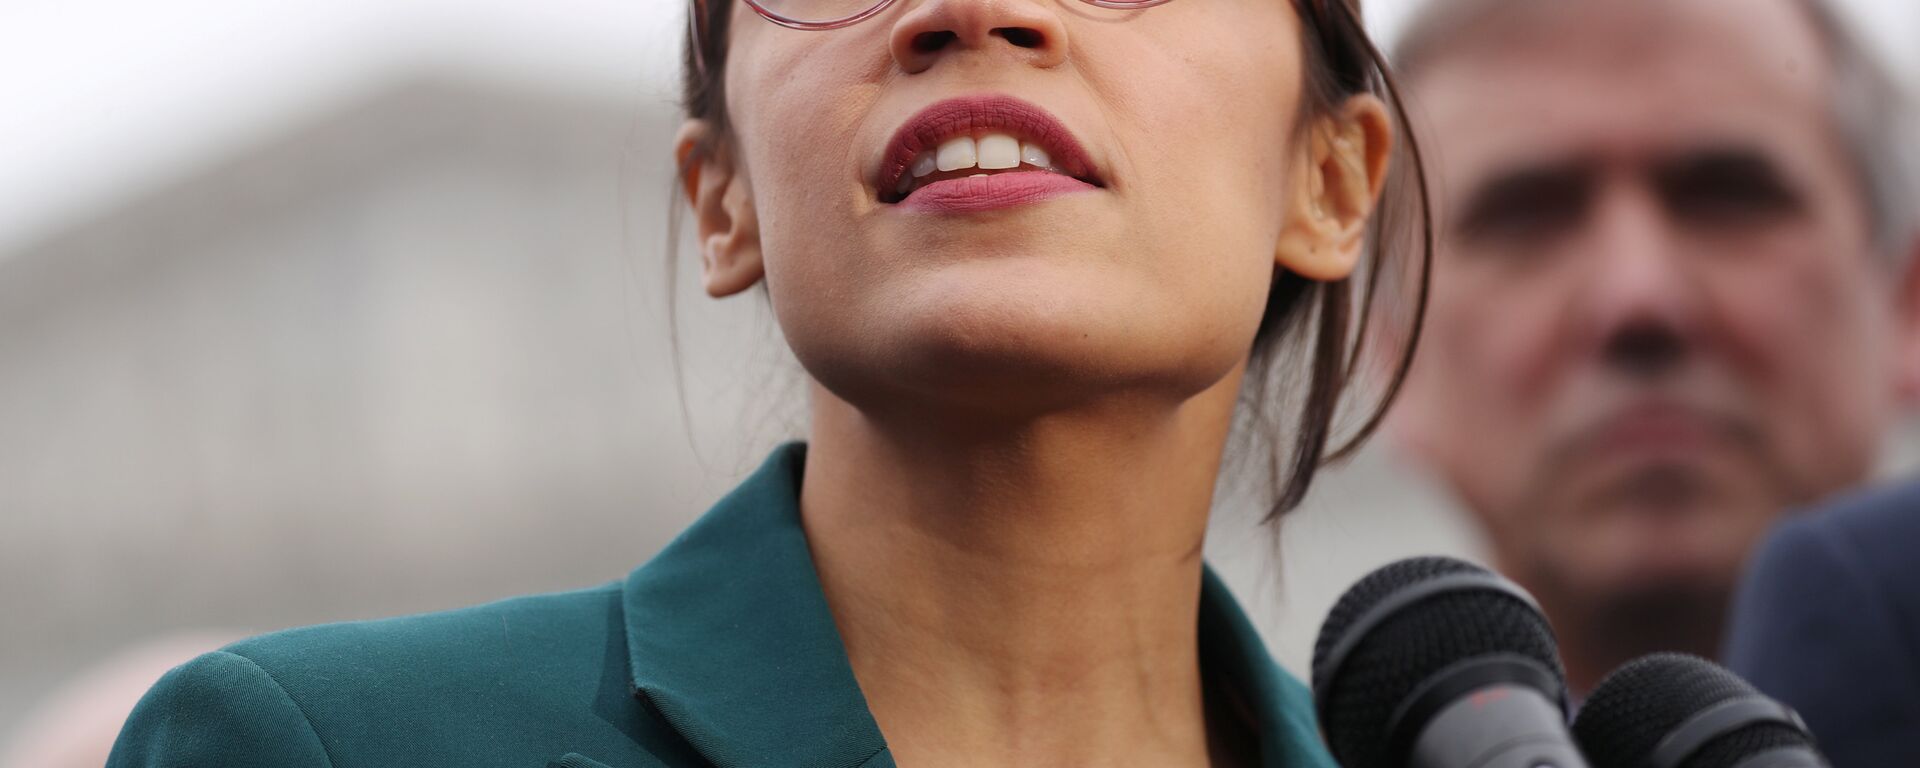 U.S. Representative Alexandria Ocasio-Cortez (D-NY) speaks during a news conference for a proposed Green New Deal to achieve net-zero greenhouse gas emissions in 10 years, at the U.S. Capitol in Washington, U.S. February 7, 2019 - Sputnik Türkiye, 1920, 13.10.2022